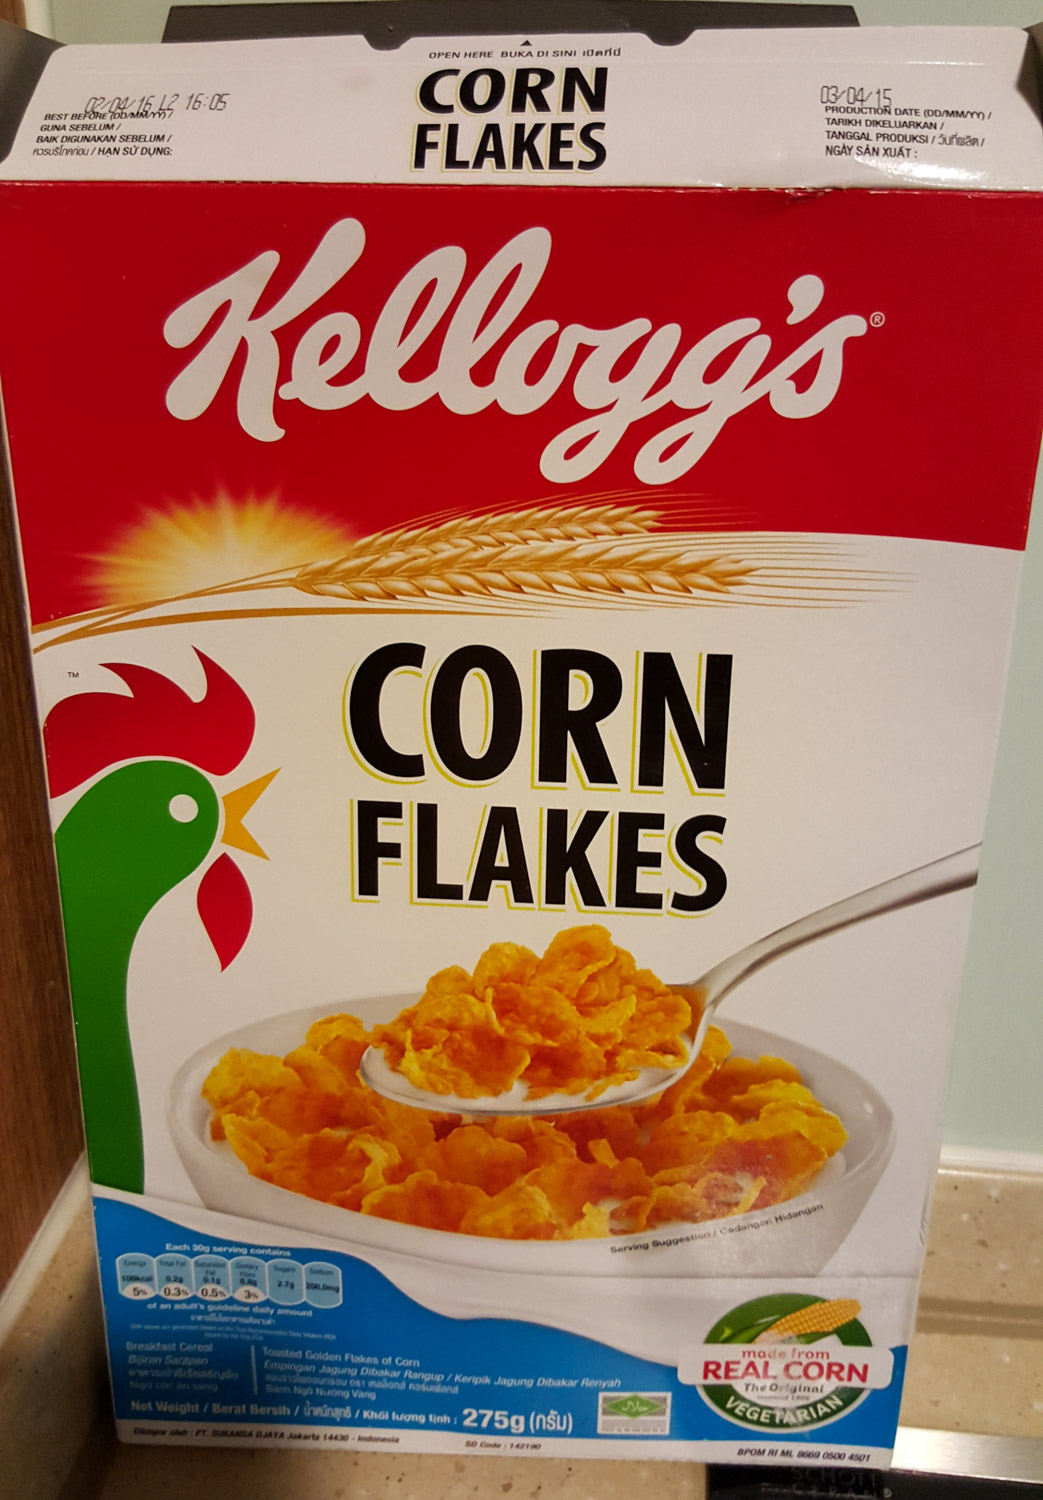 Just your standard box of Corn Flakes.